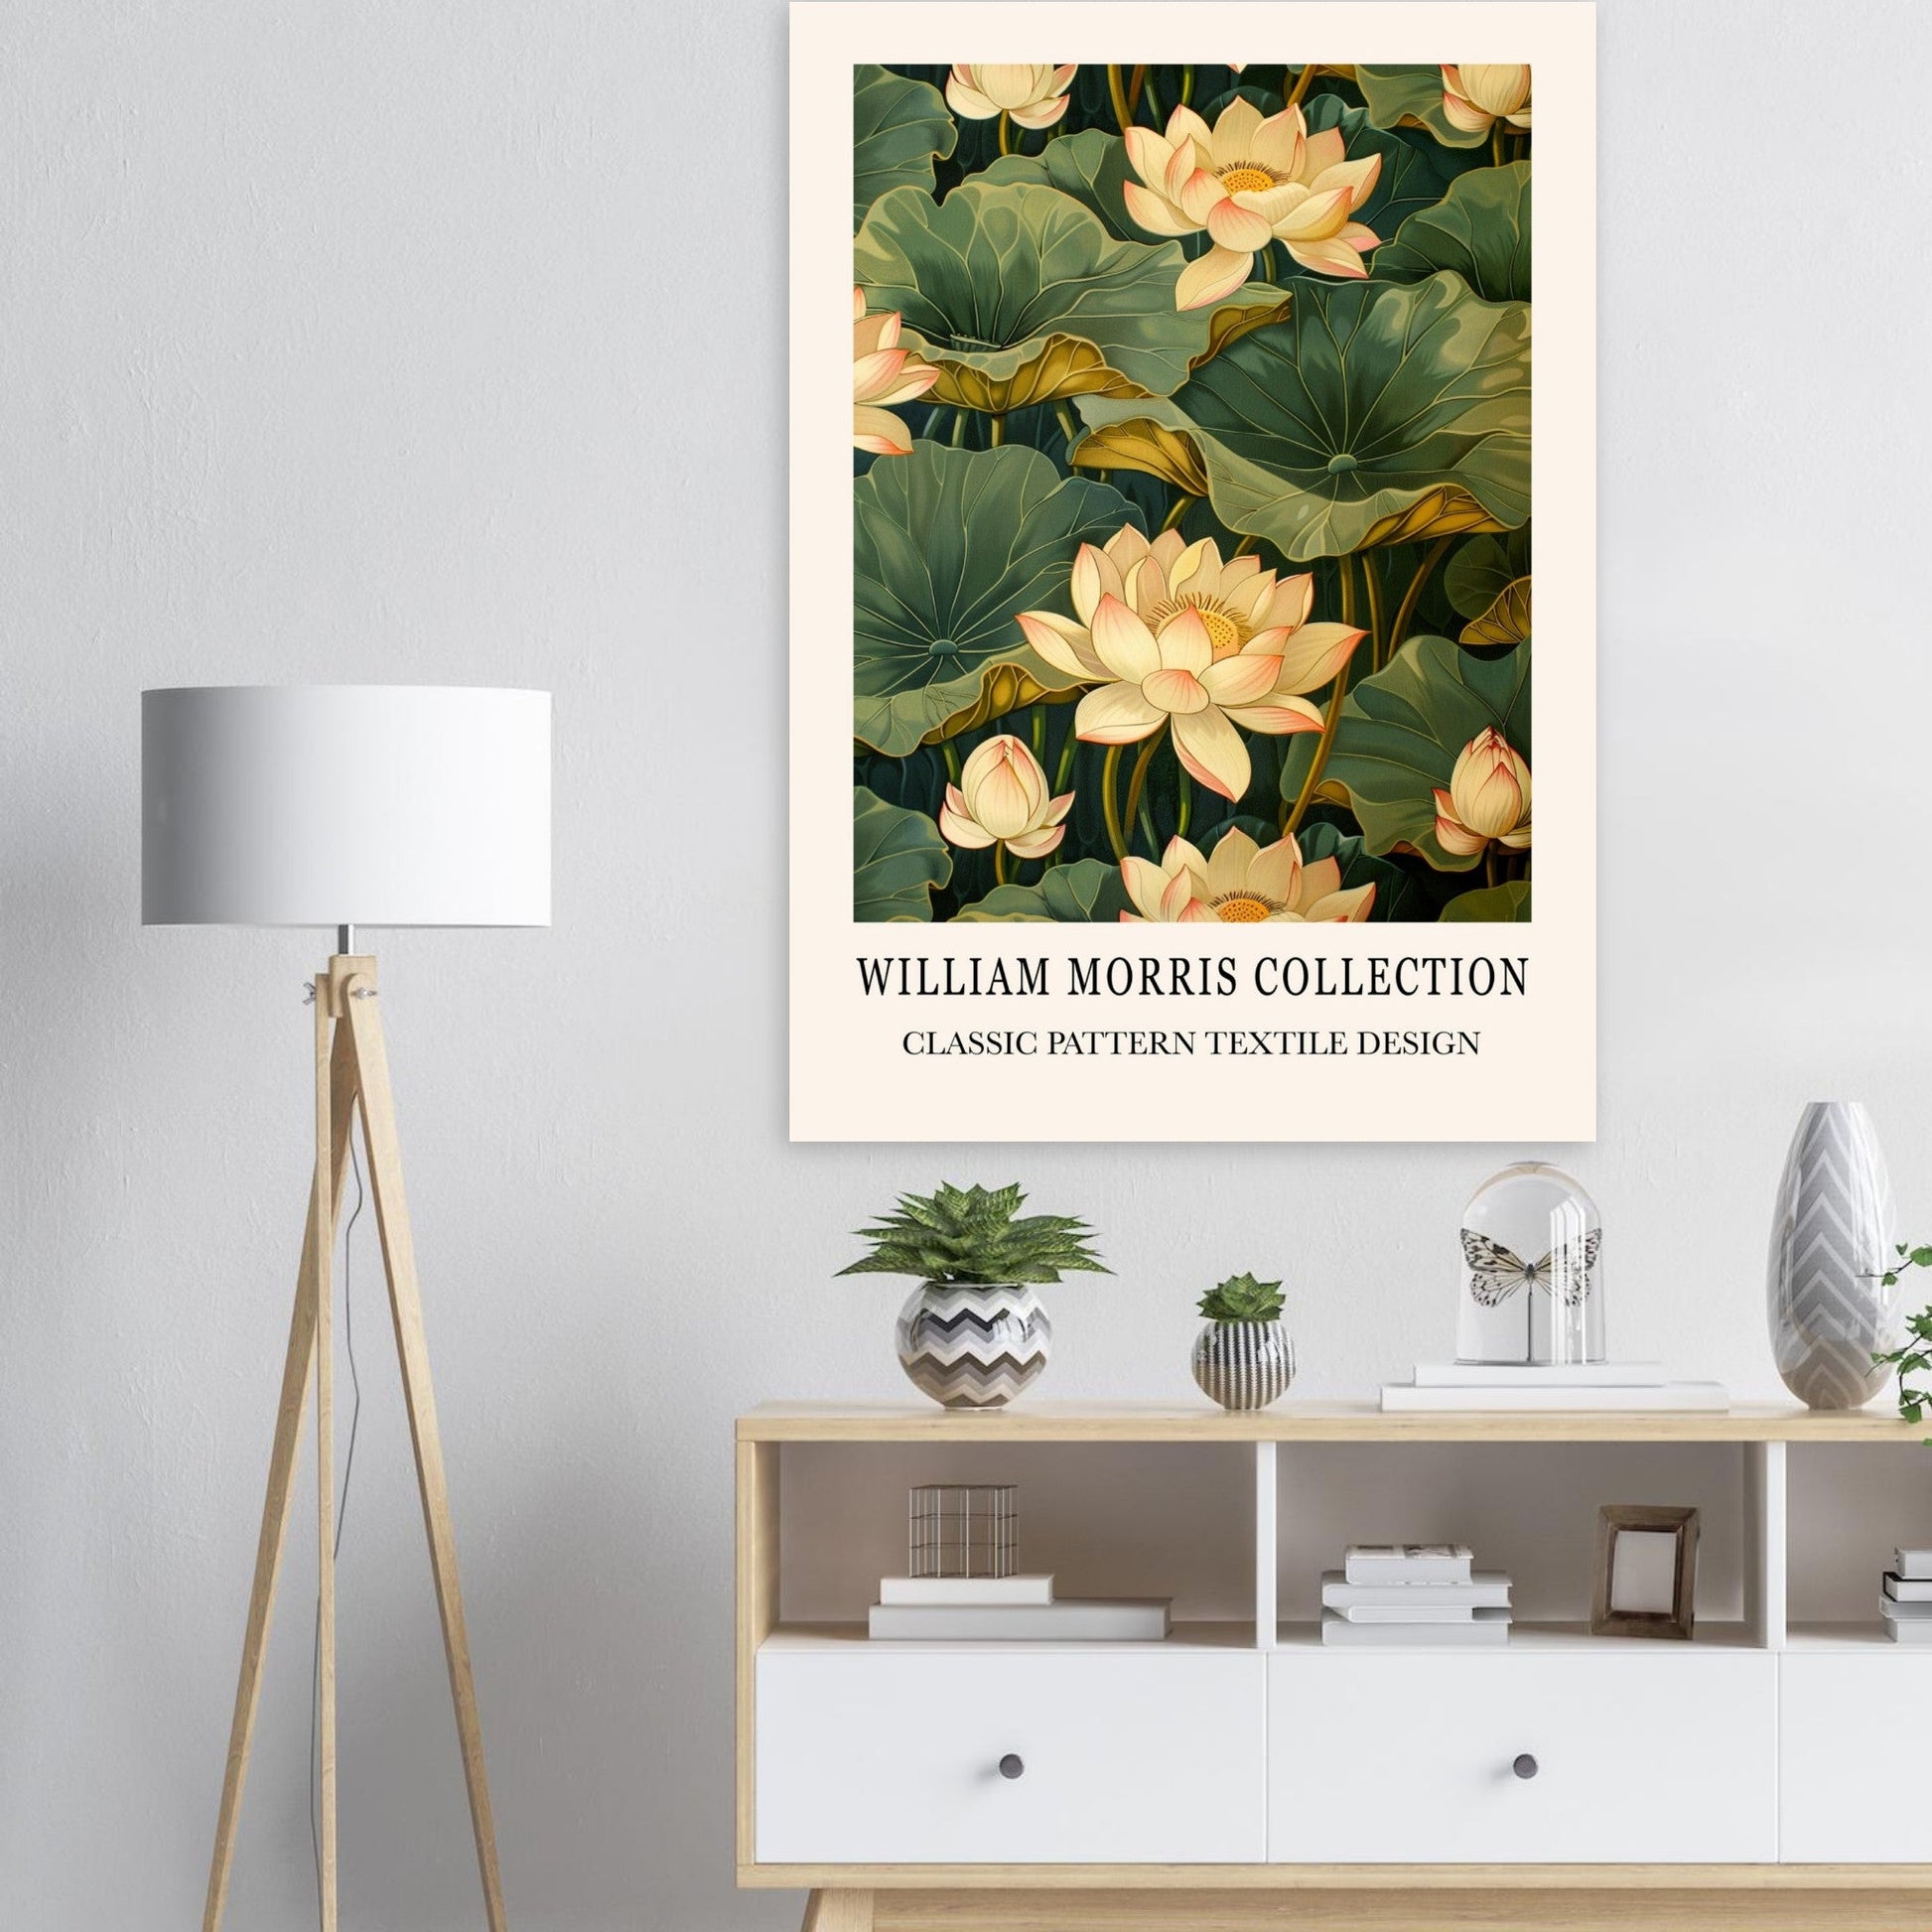 Water Lilies - William Morris, Inspired By William Morris, Water Lilies, William Morris Art, #illieeart